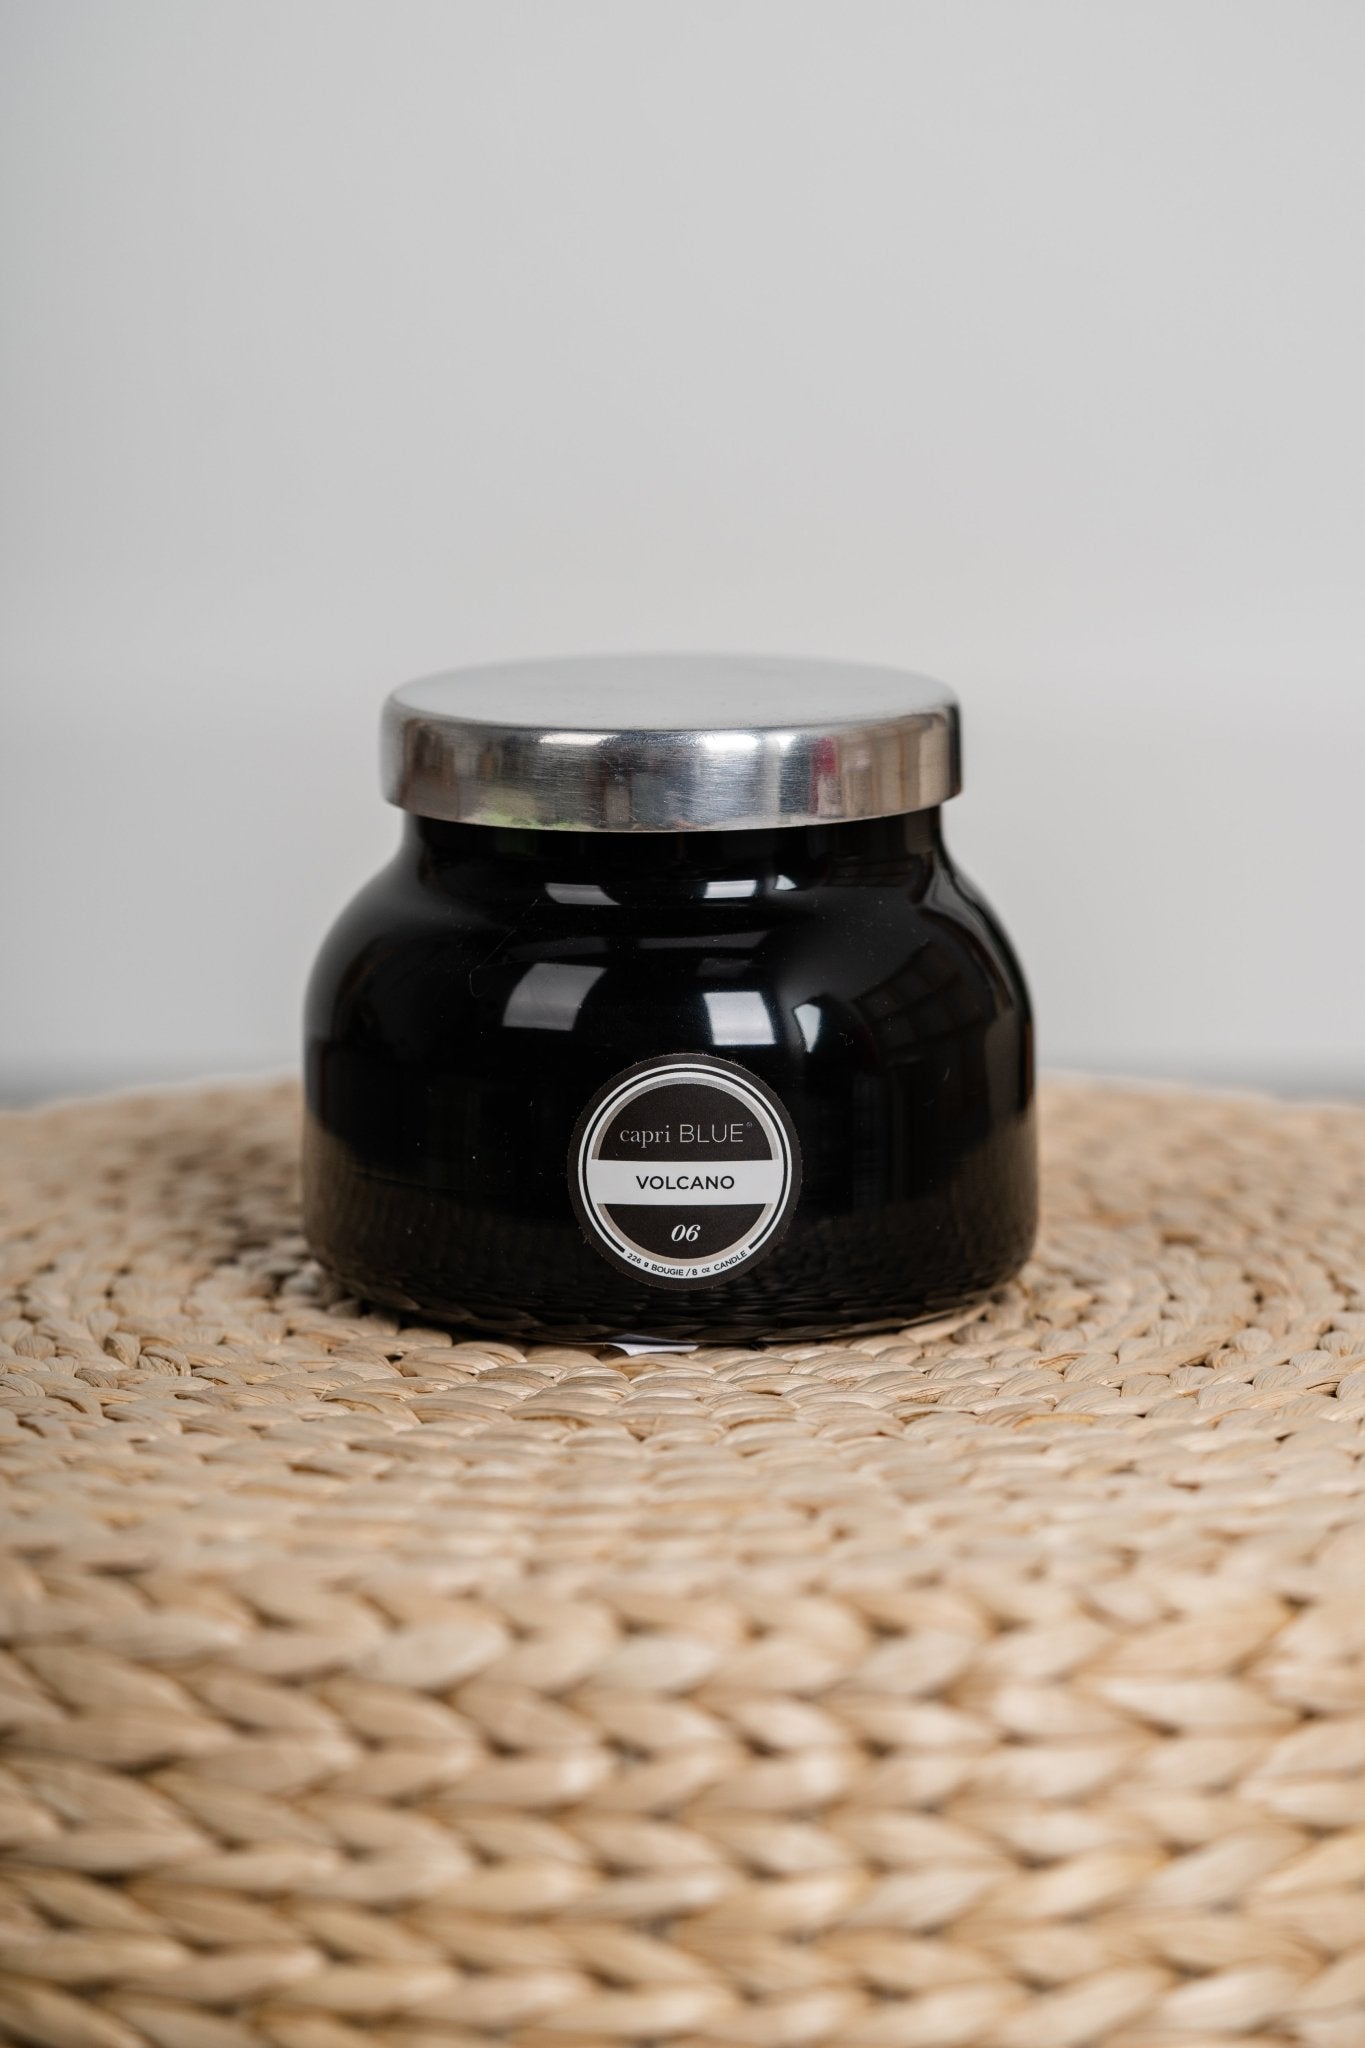 Capri Blue volcano 8 oz petite candle black - Trendy Candles and Scents at Lush Fashion Lounge Boutique in Oklahoma City